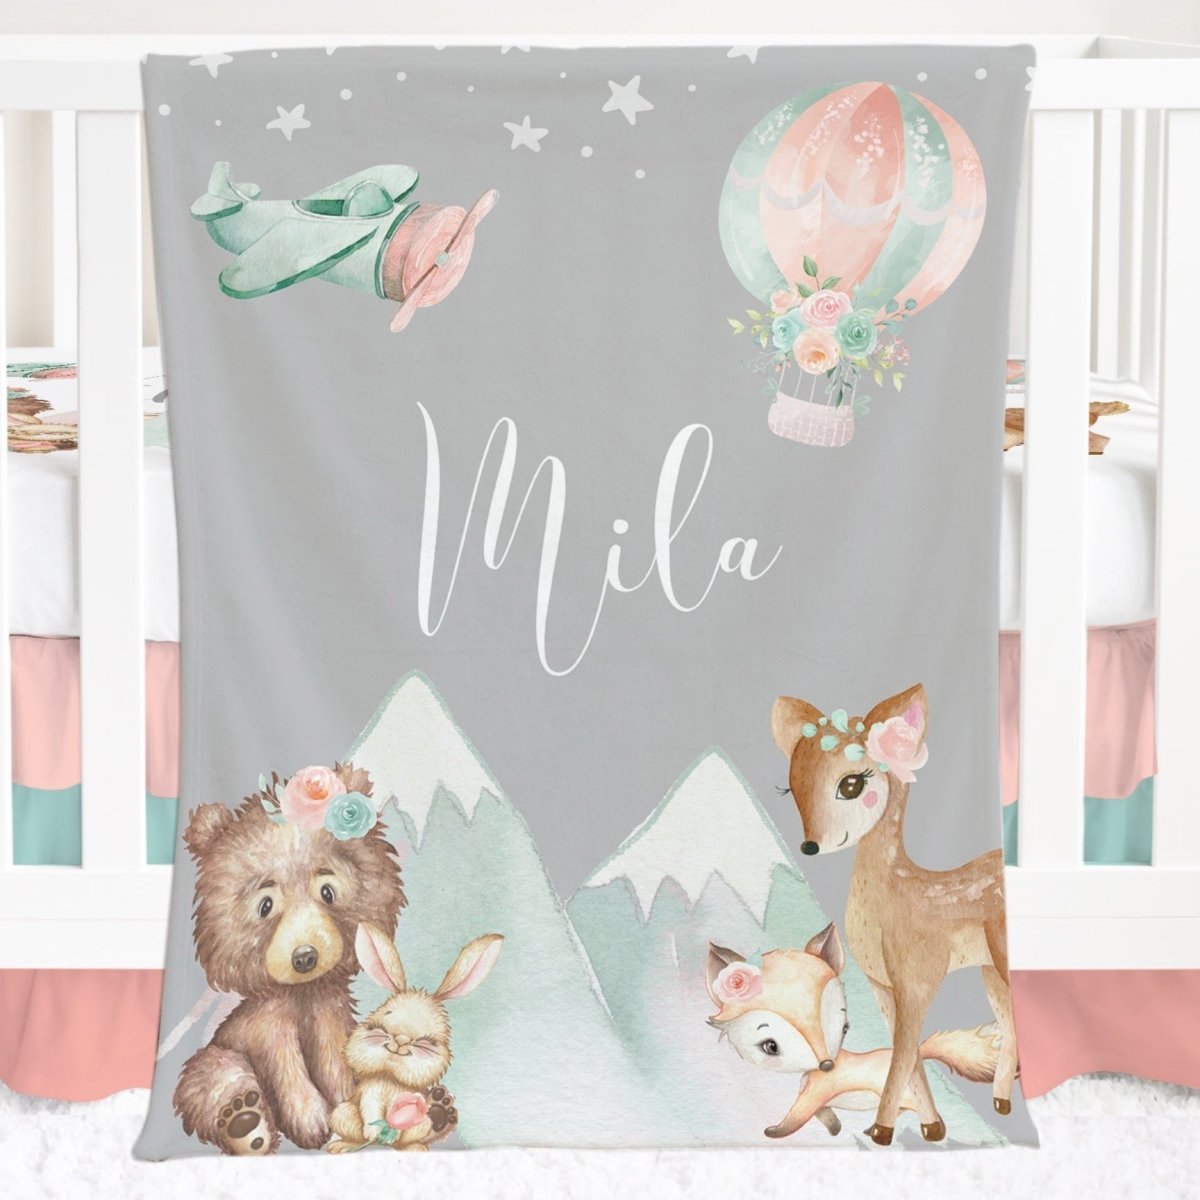 Woodland Floral Adventure Personalized Minky Blanket - gender_girl, Personalized_Yes, text